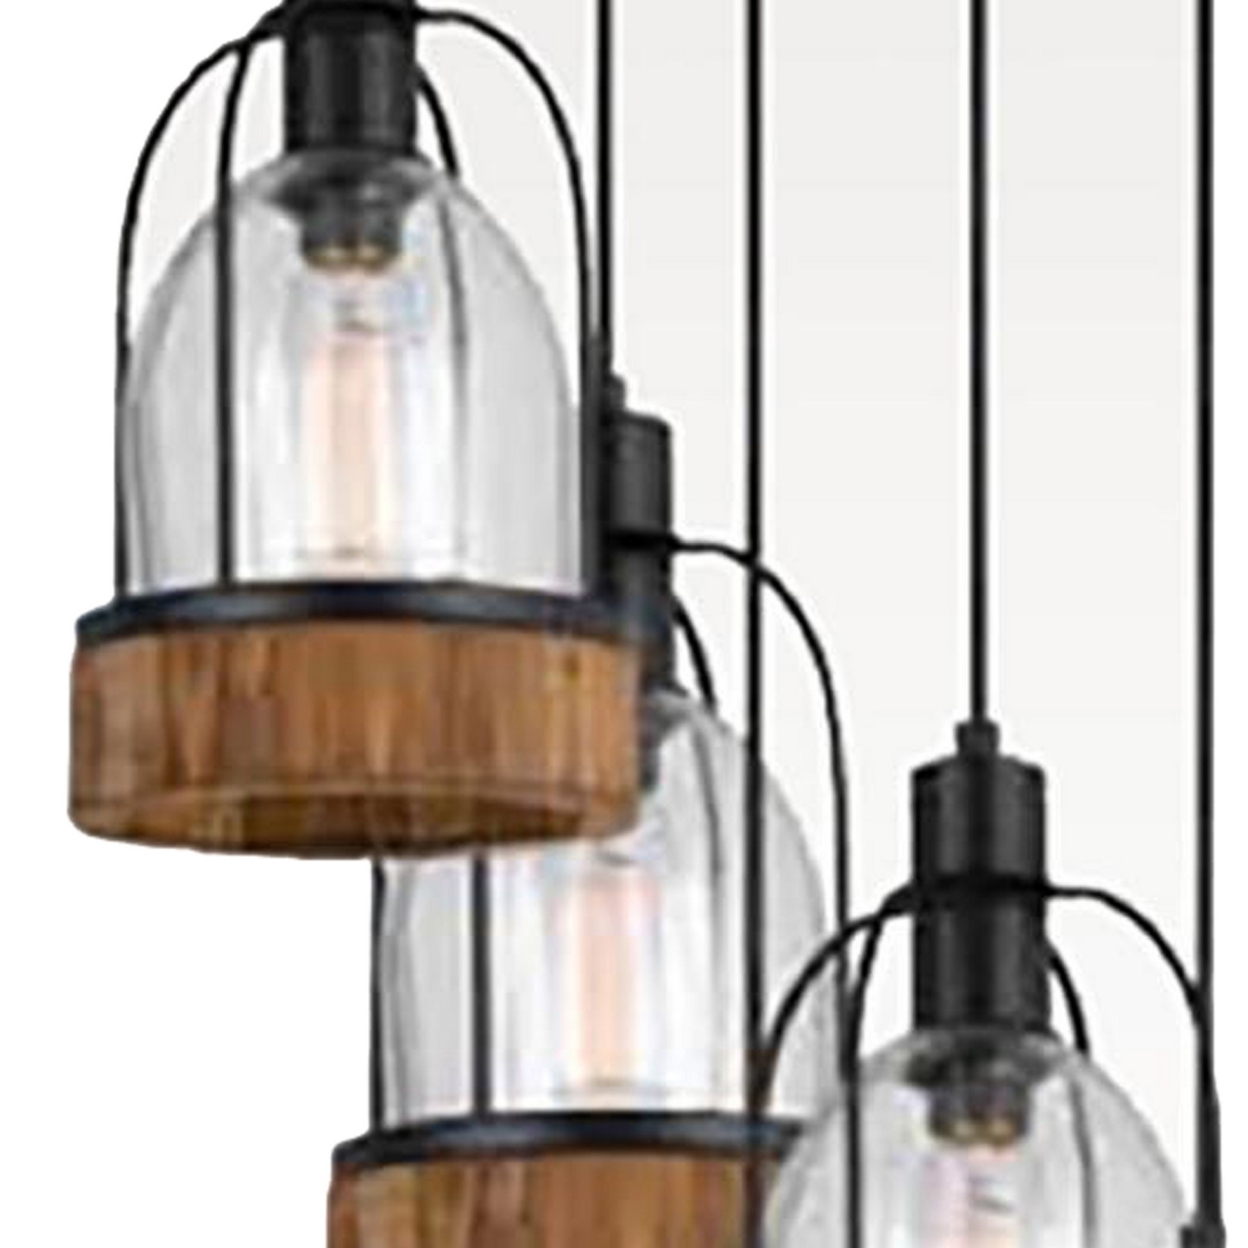 5 Bulb Wind Chime Design Pendant Fixture With Wooden And Glass Shade, Black- Saltoro Sherpi